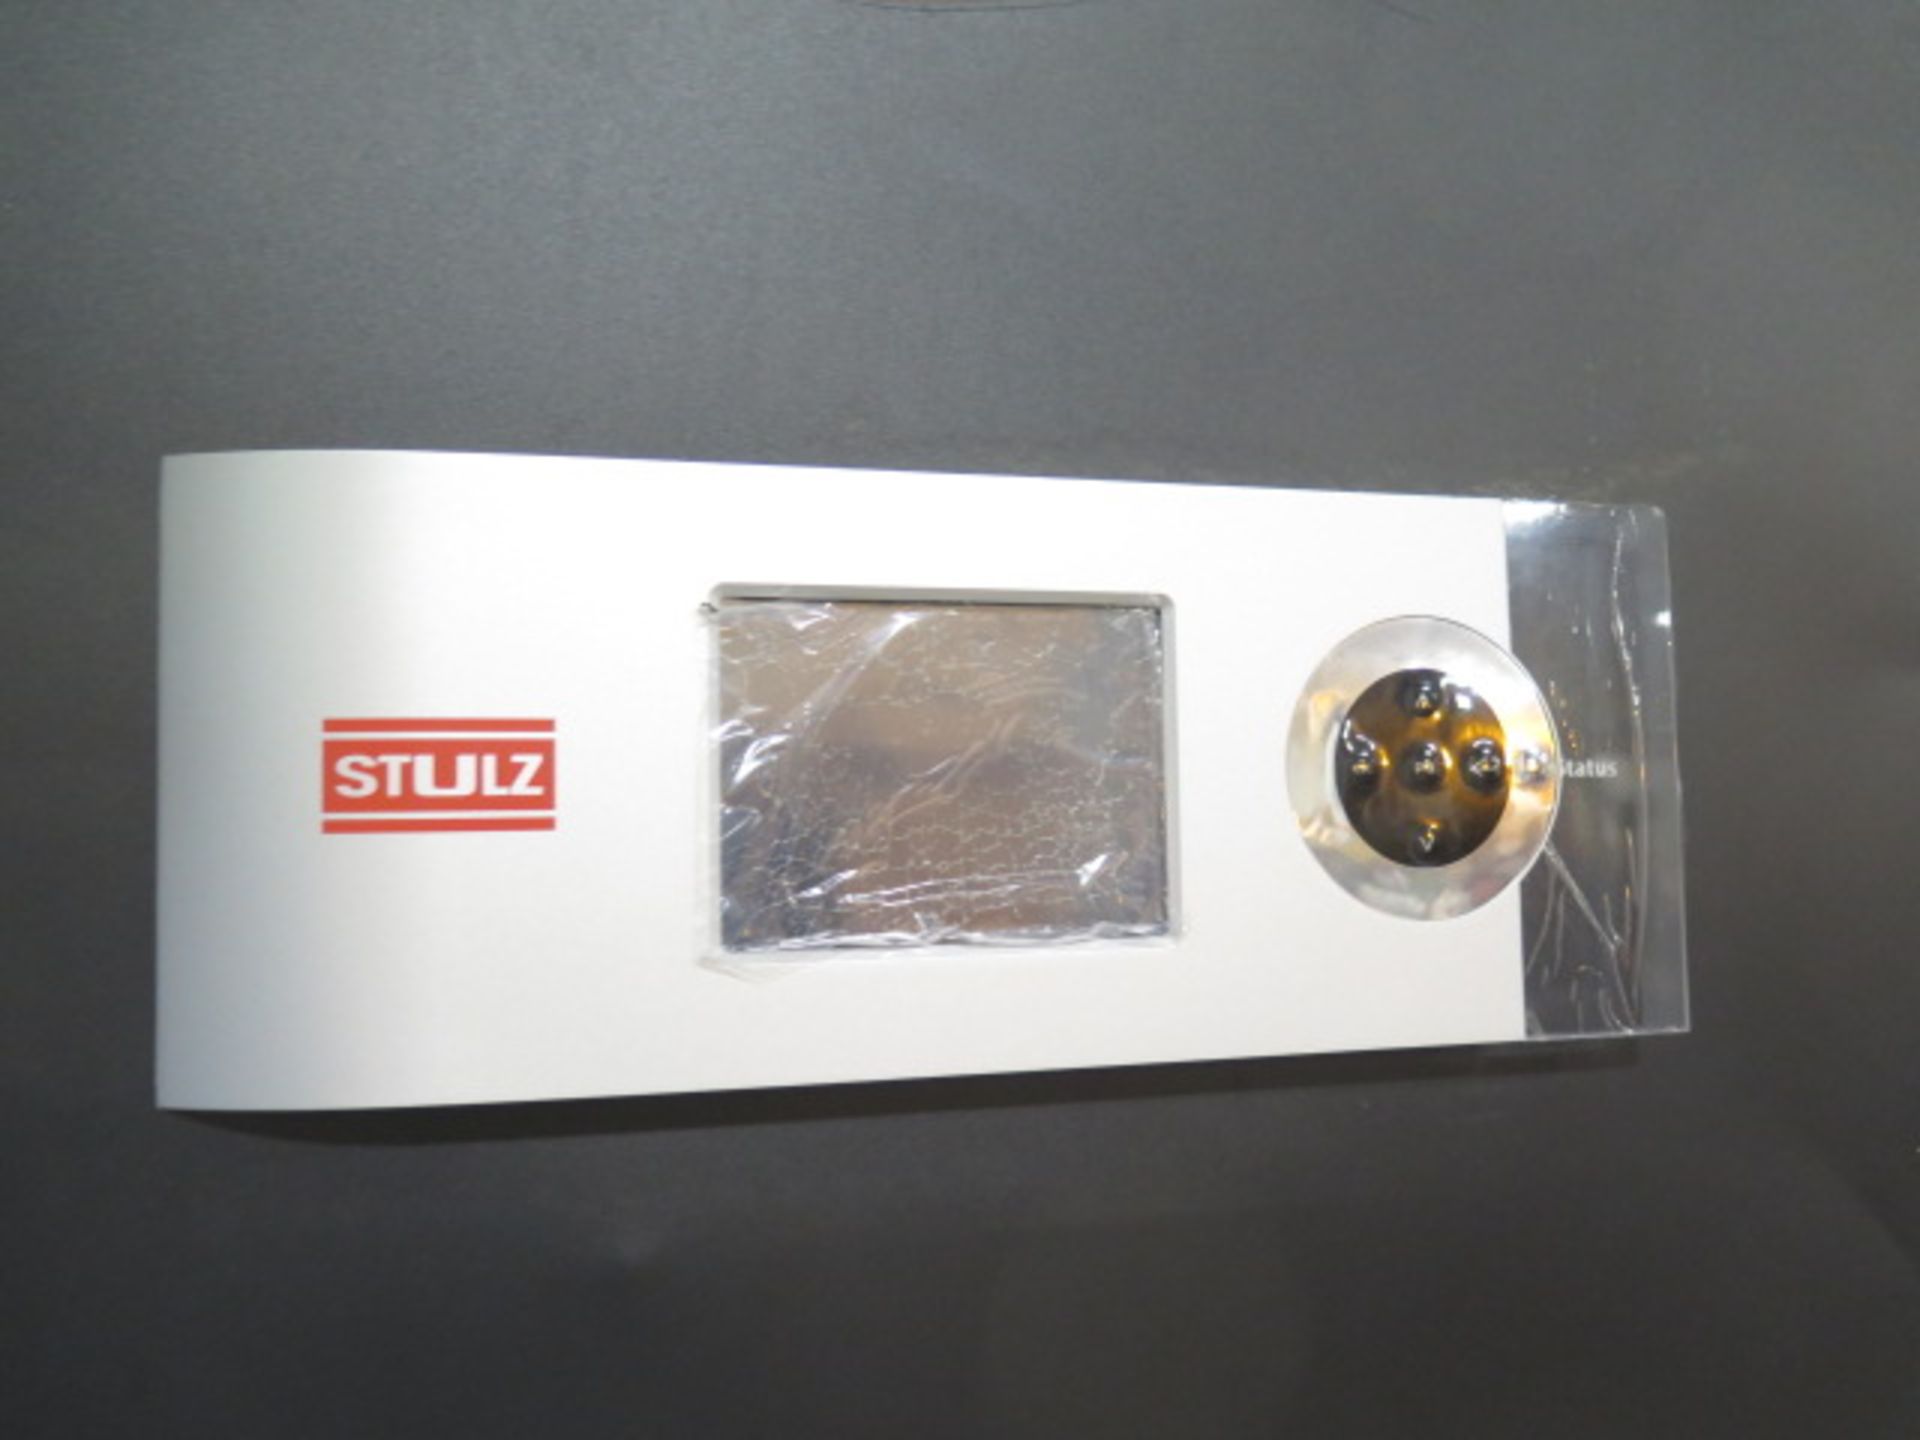 Stulz "Cyber AiR" COS-120-AR-U-EC Control Package (NEW) (SOLD AS-IS - NO WARRANTY) - Image 5 of 7